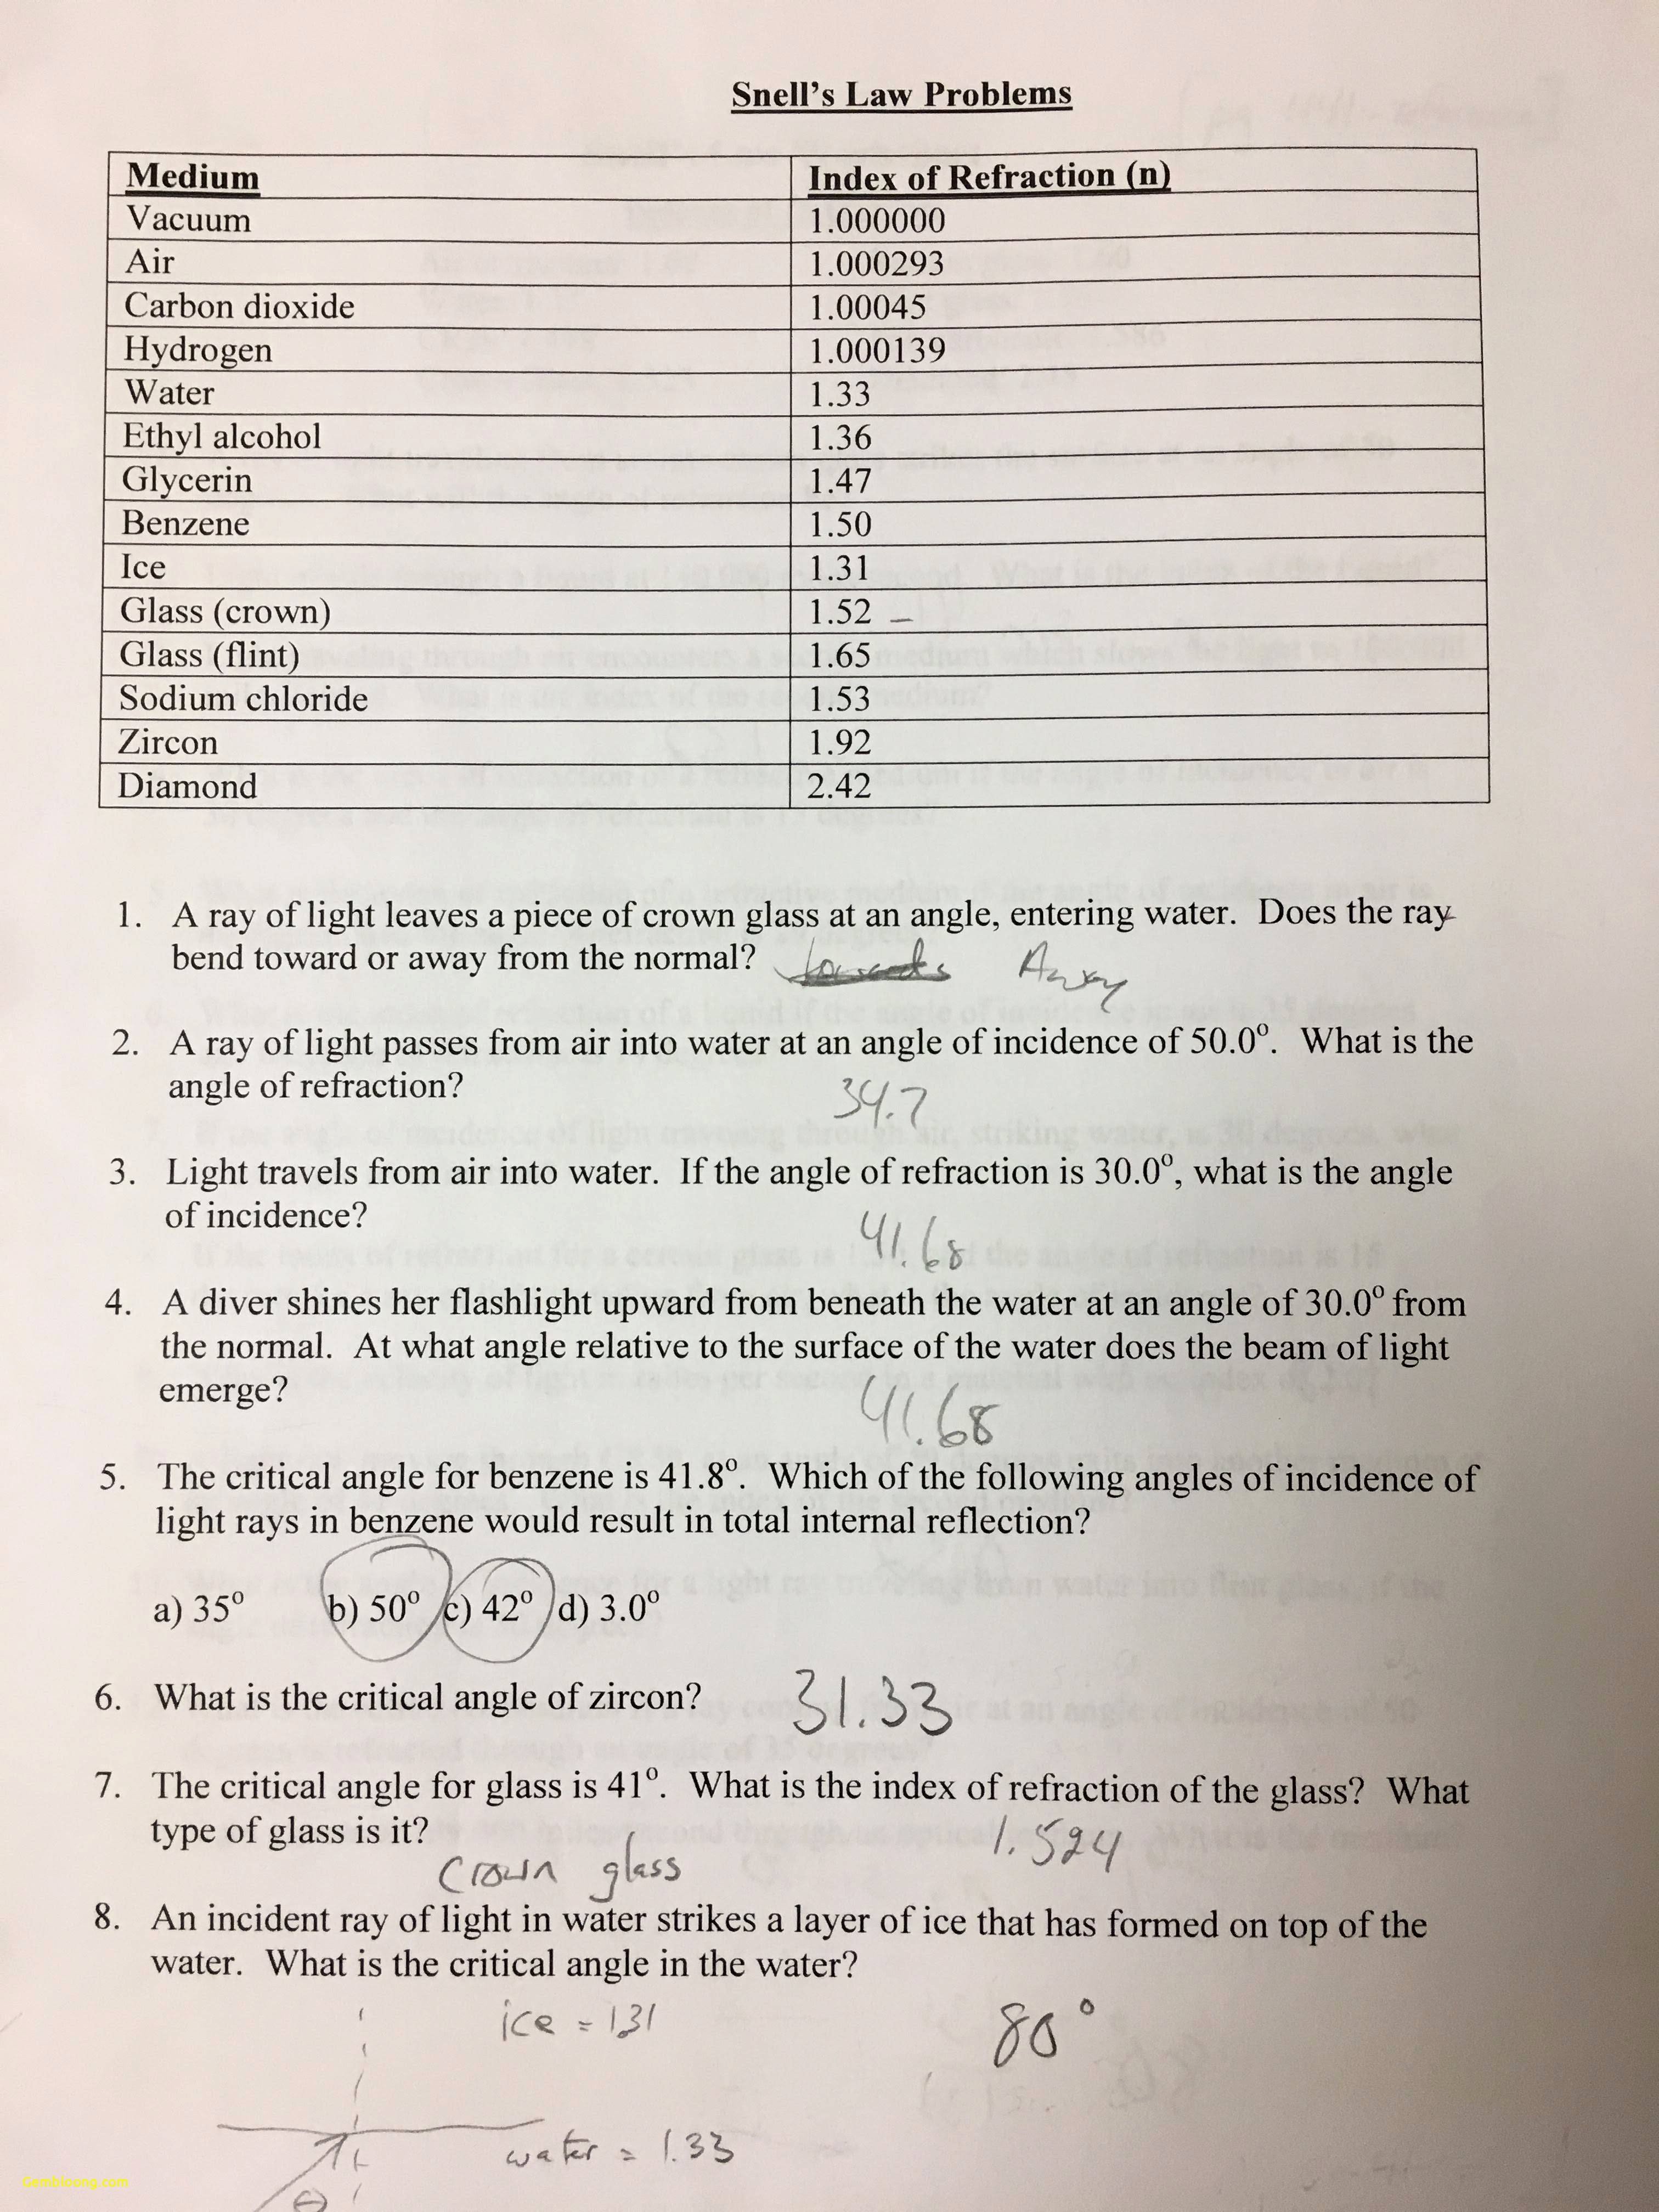 Monetary Policy Worksheet Answers Best Of Experimental Design Worksheet Answers Cramerforcongress